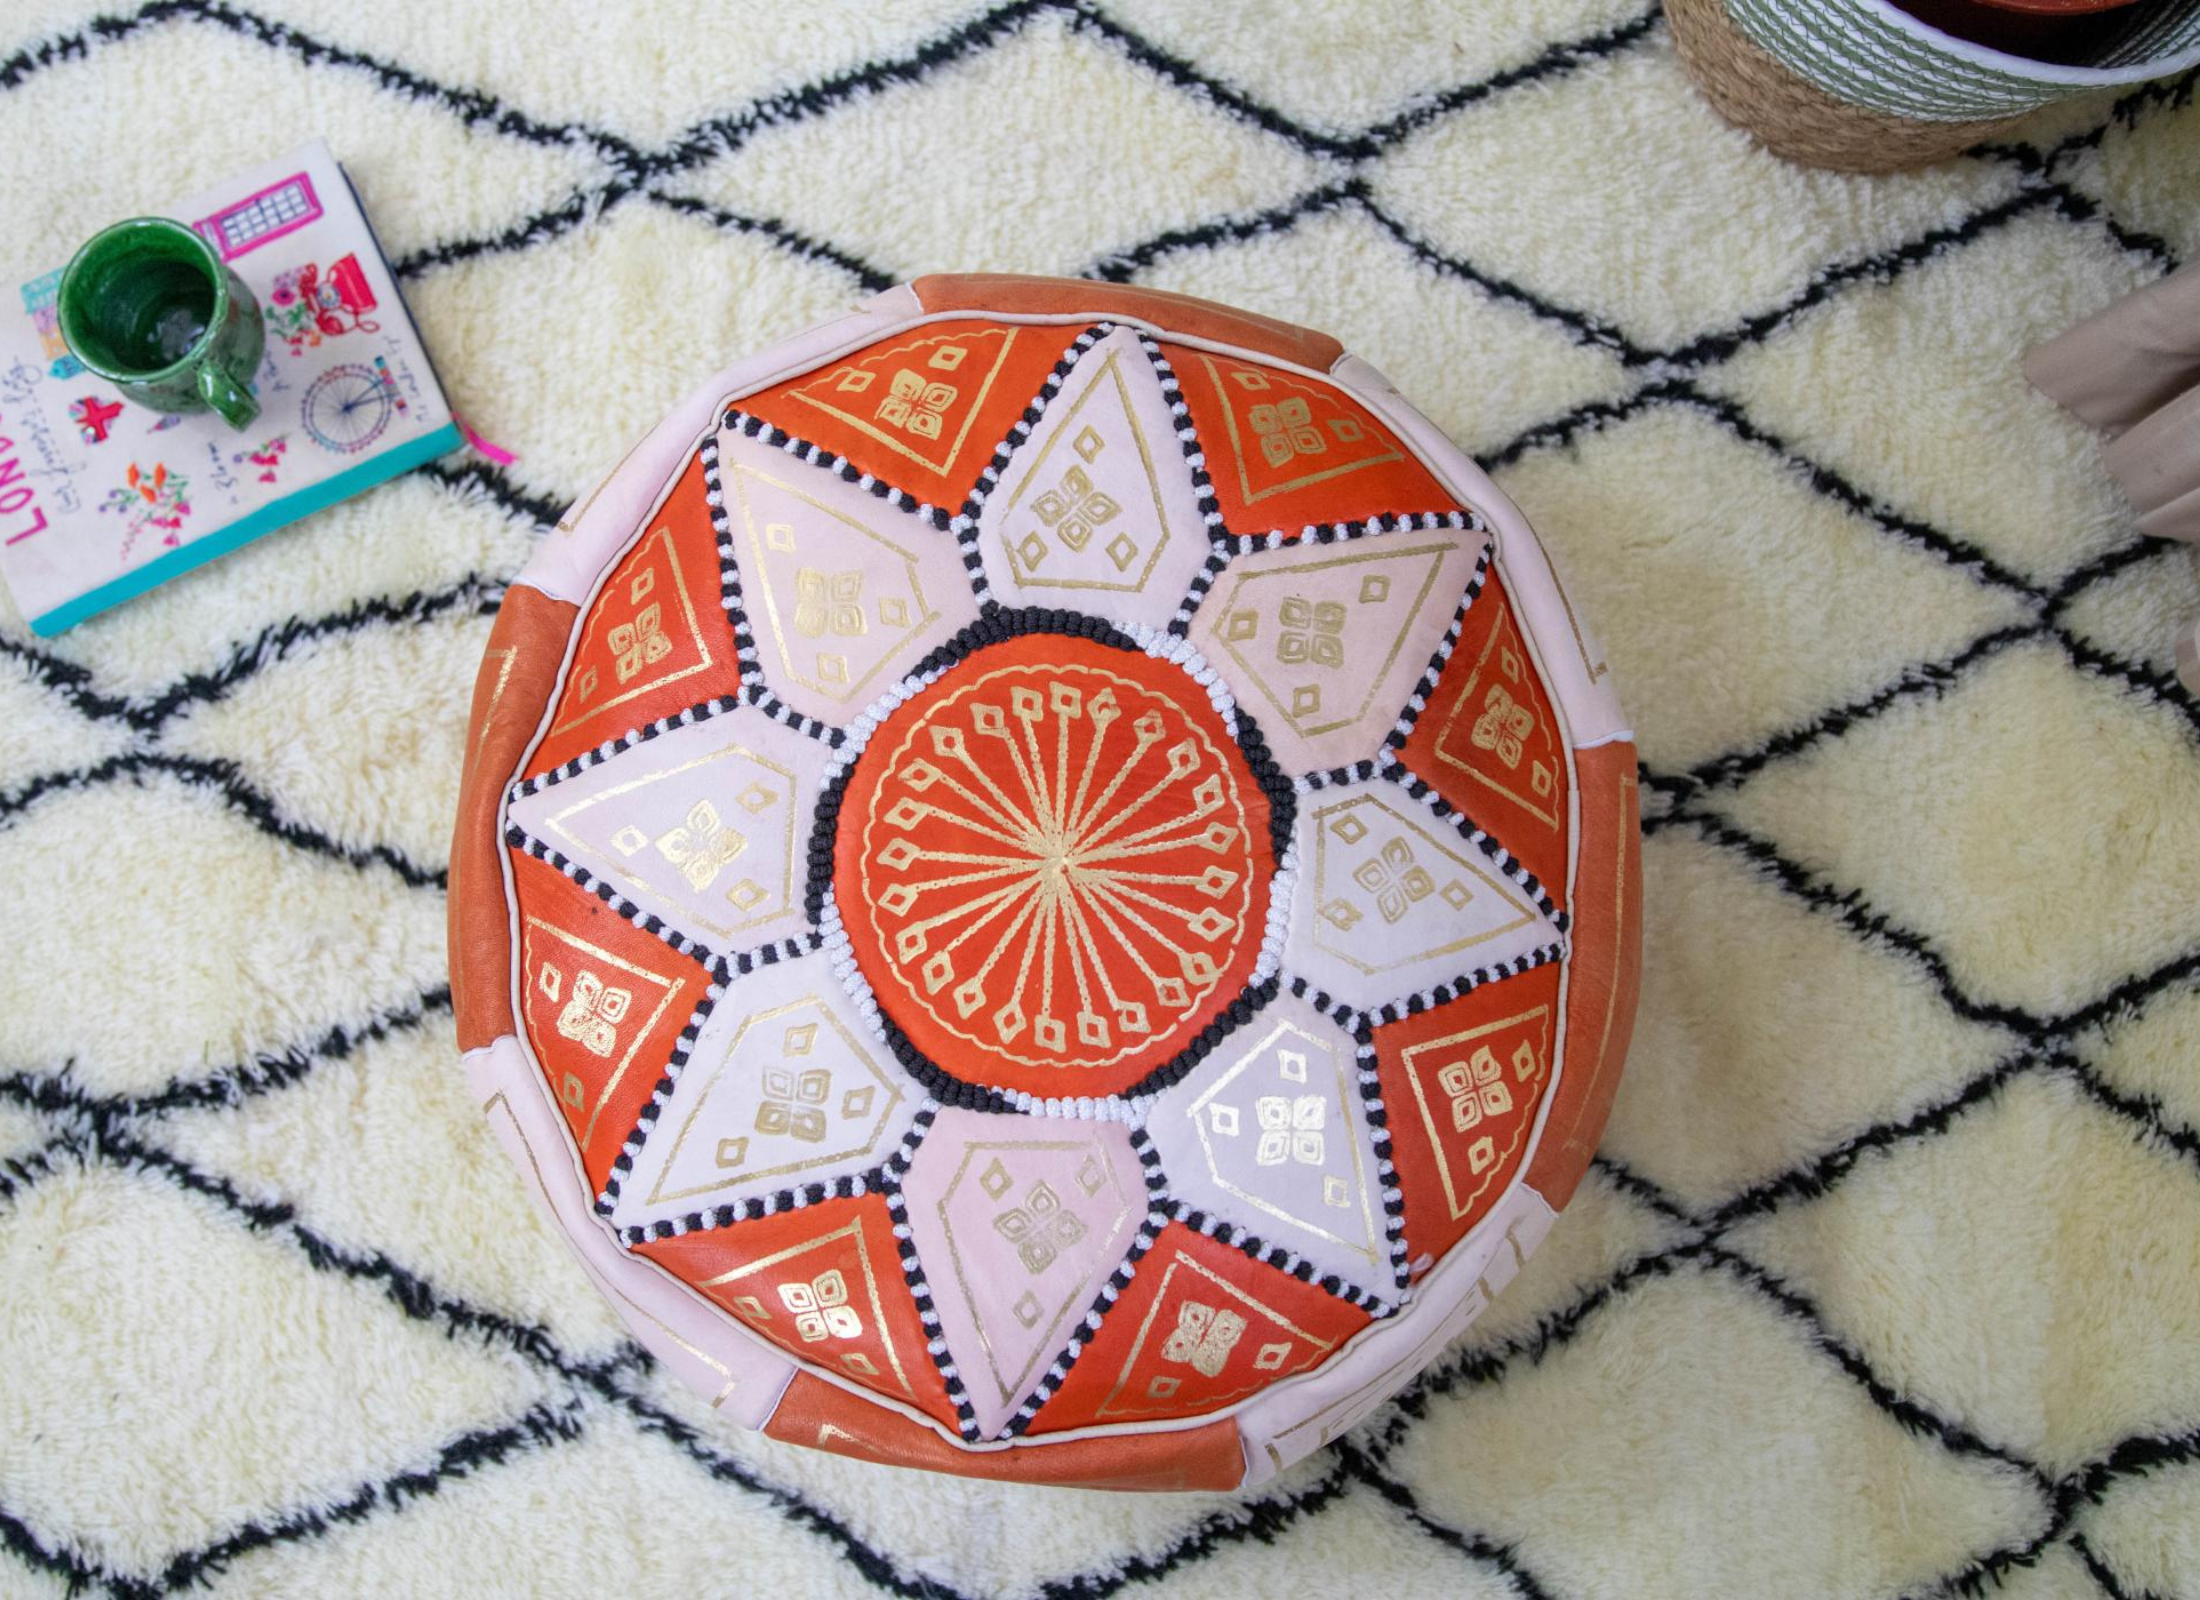 Moroccan Leather Pouf in Orange & Gold - Leather Poufe Ottoman